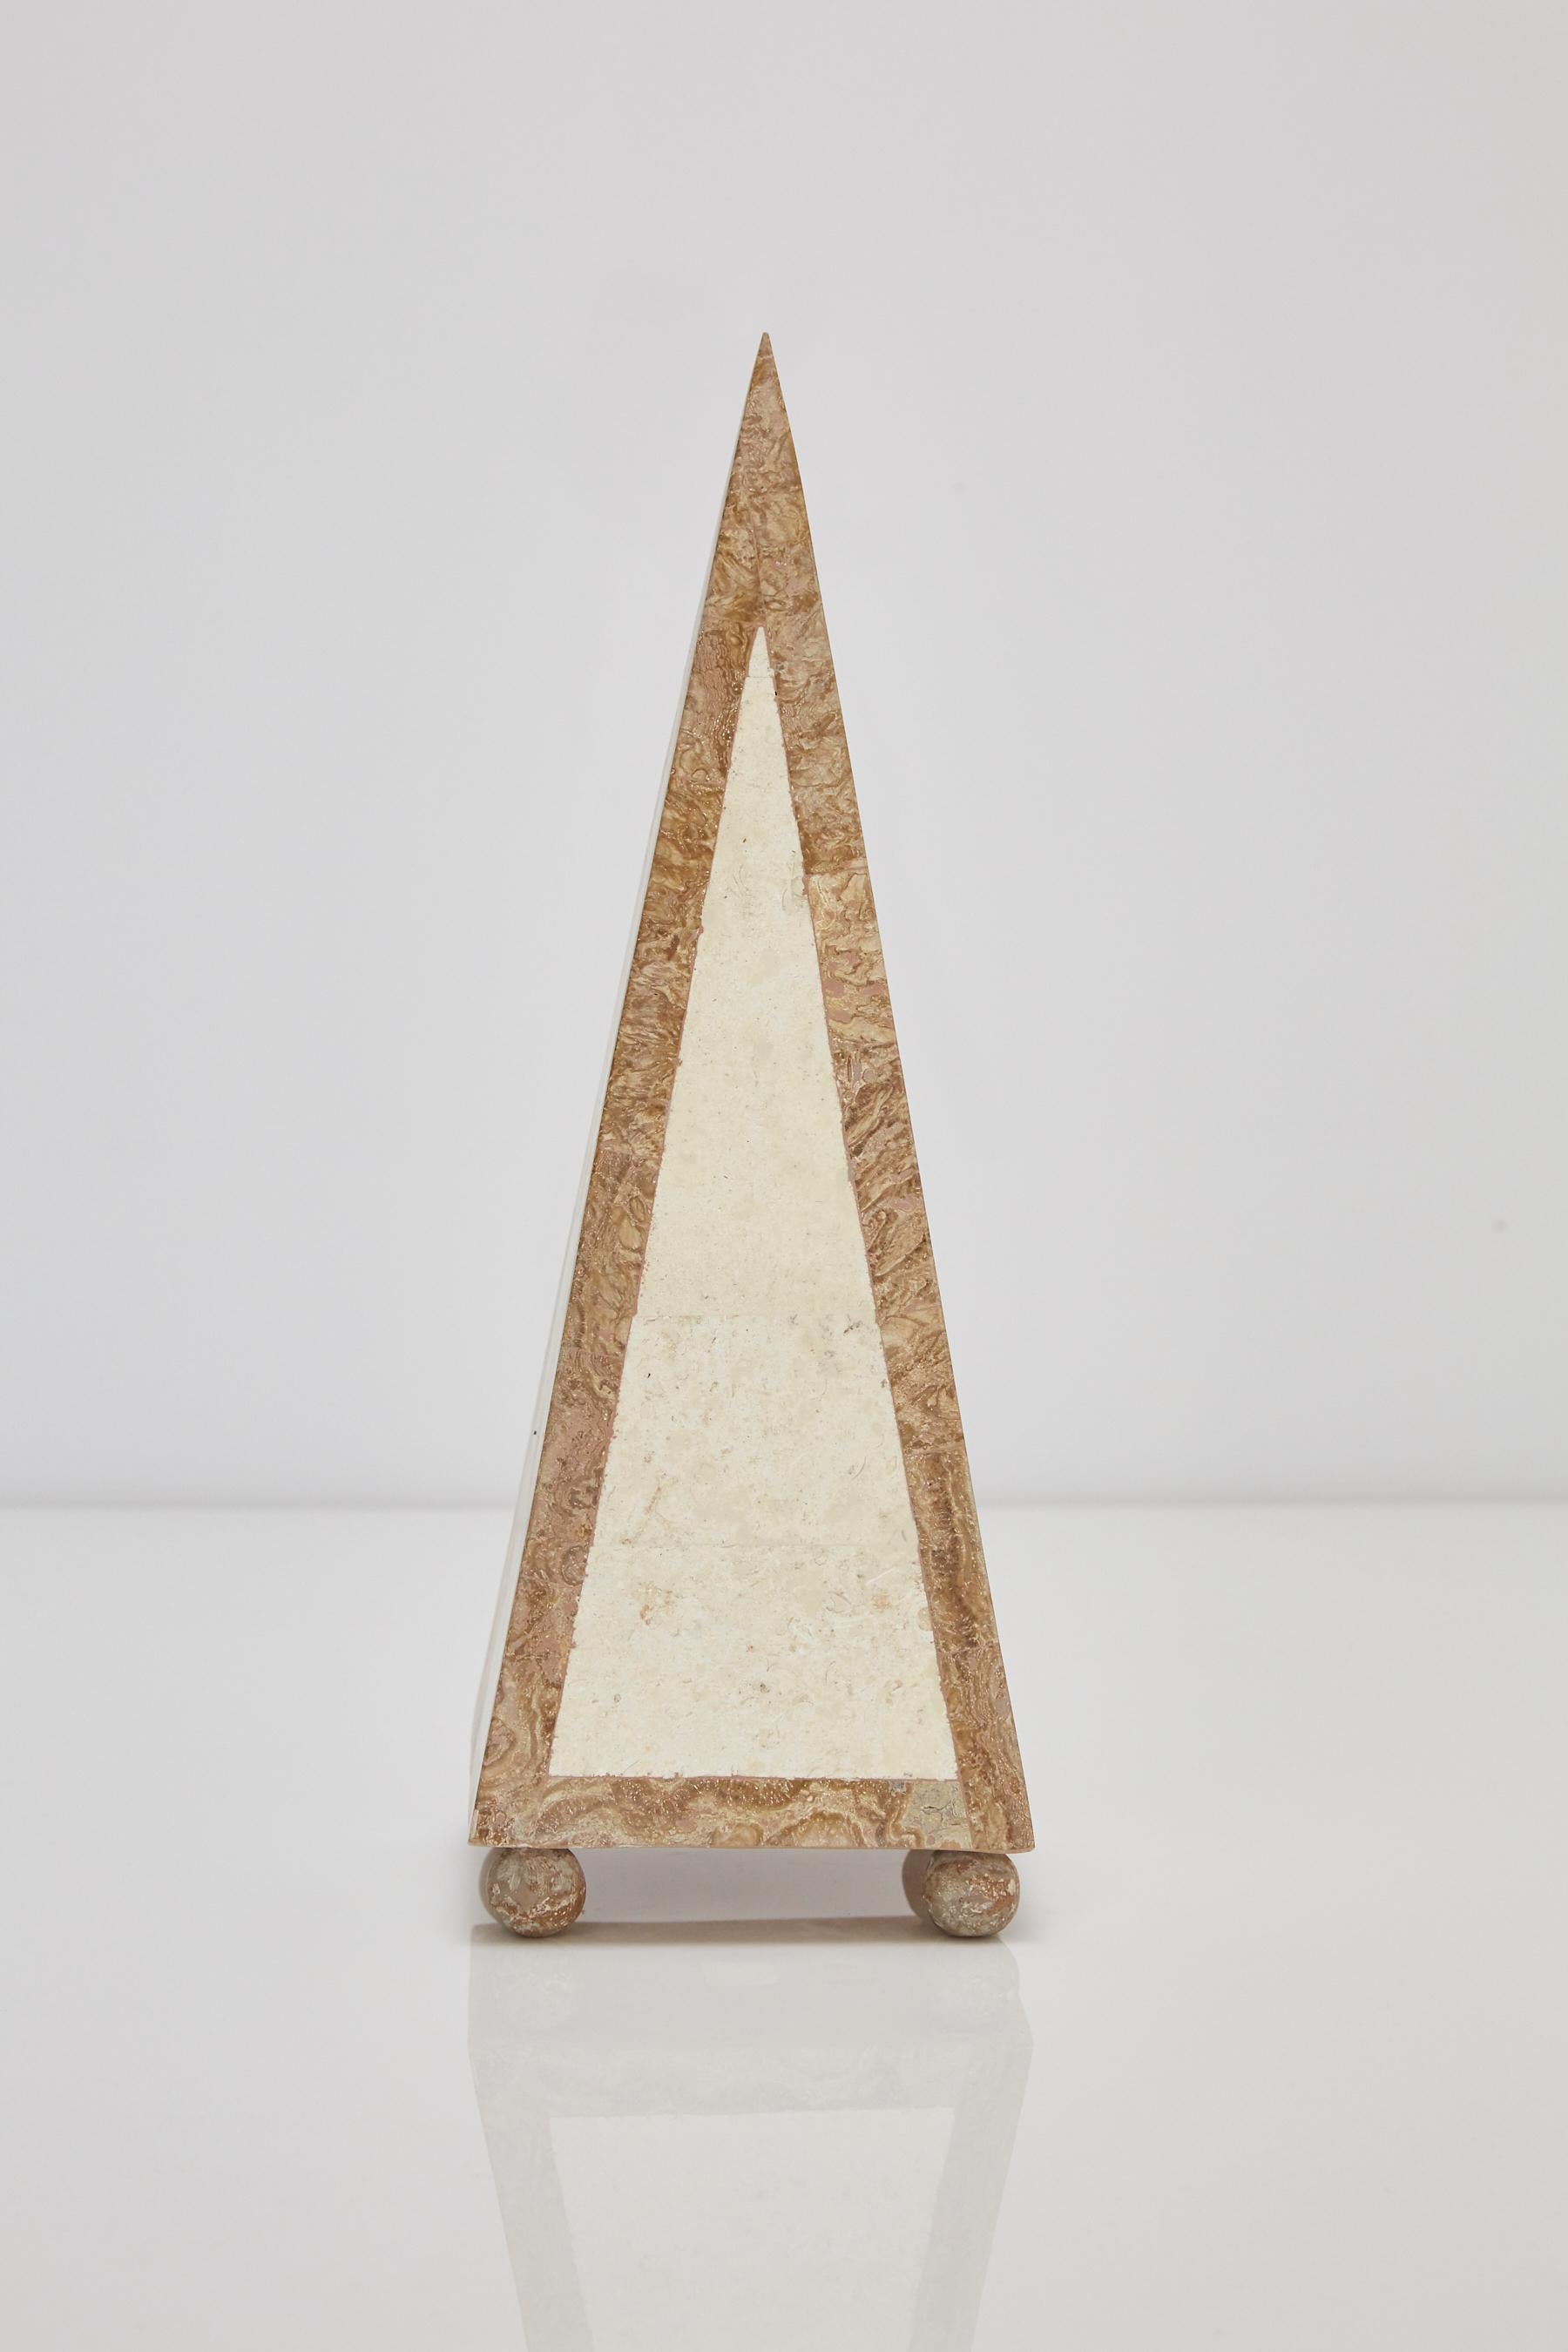 15 in. tall decorative pyramid in tessellated Mactan stone with wood stone trim.

Coordinates with items LU1484211449911 and LU1484211449901 for a set of three.

All furnishings are made from 100% natural Fossil Stone or Seashell inlay, carefully